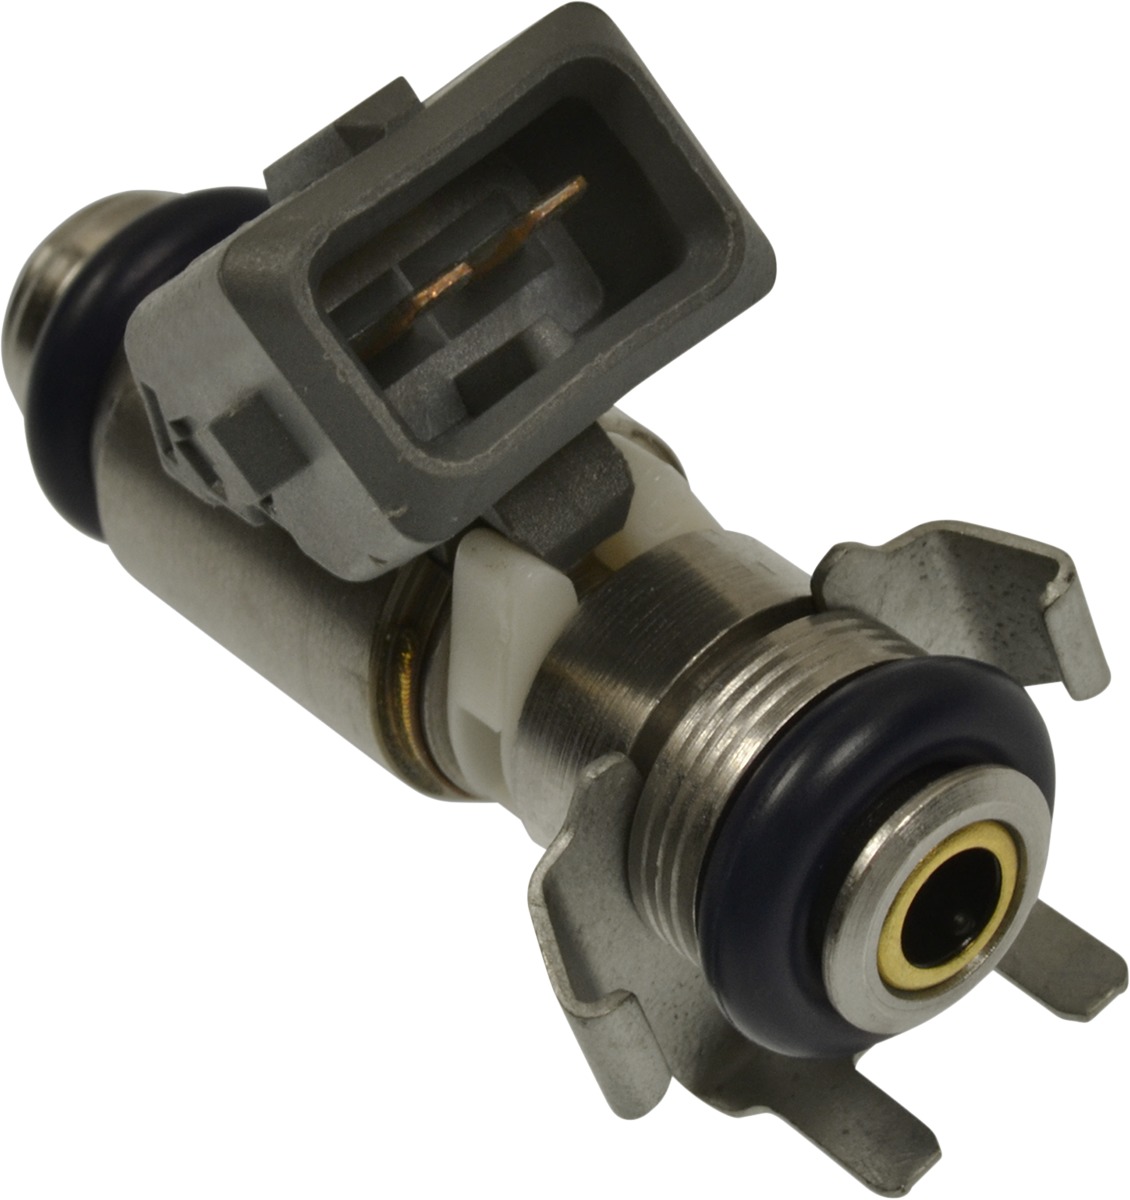 Fuel Injector Replaces Harley # 27609-01 - For 01-05 FXST/FLST, 02-05 FLT & 04-05 Dyna - Click Image to Close